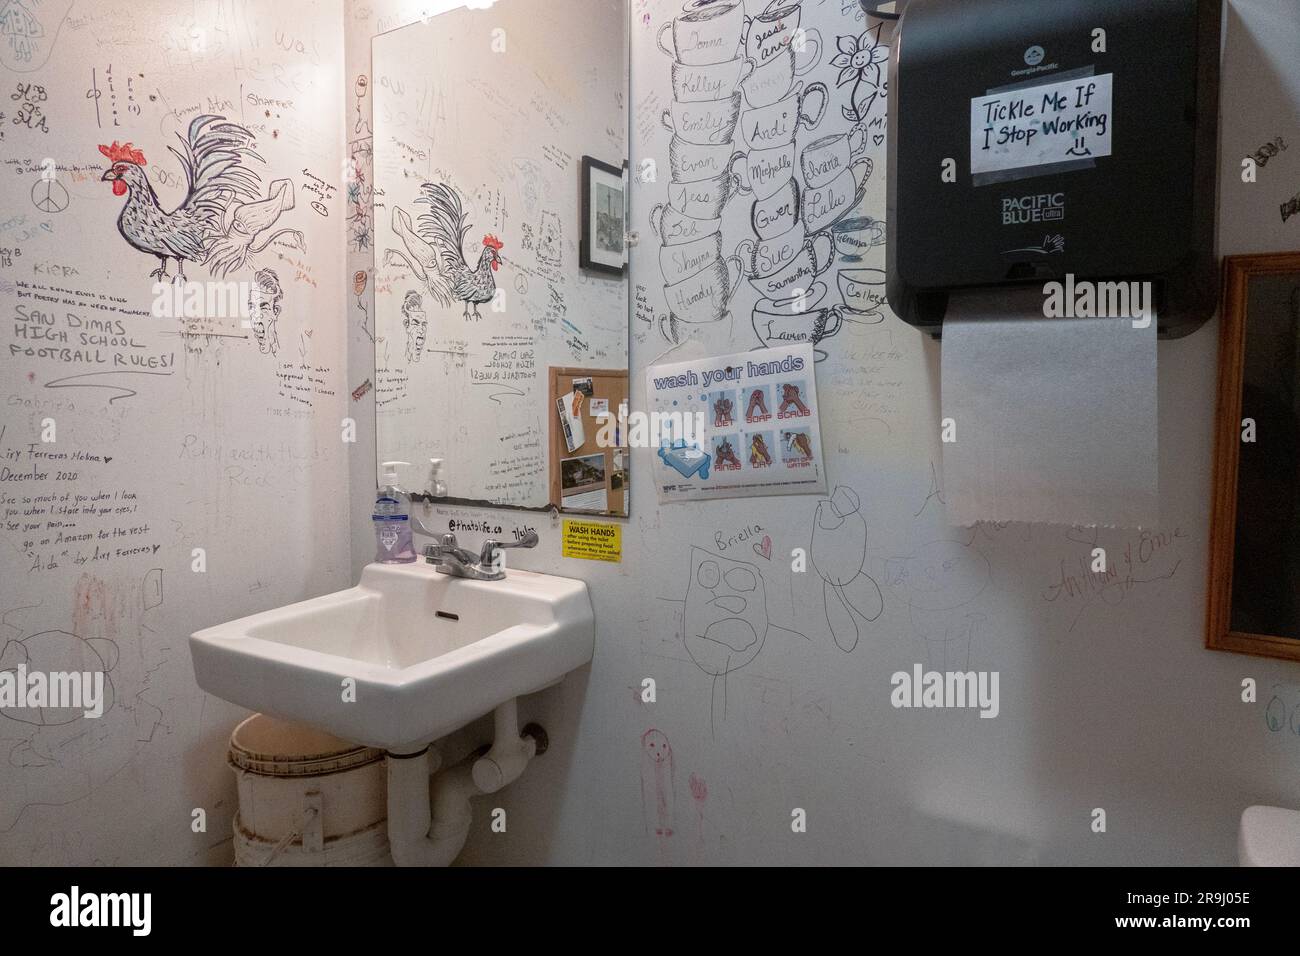 The interior of the quirky bathroom at the Freight House Cafe in ...